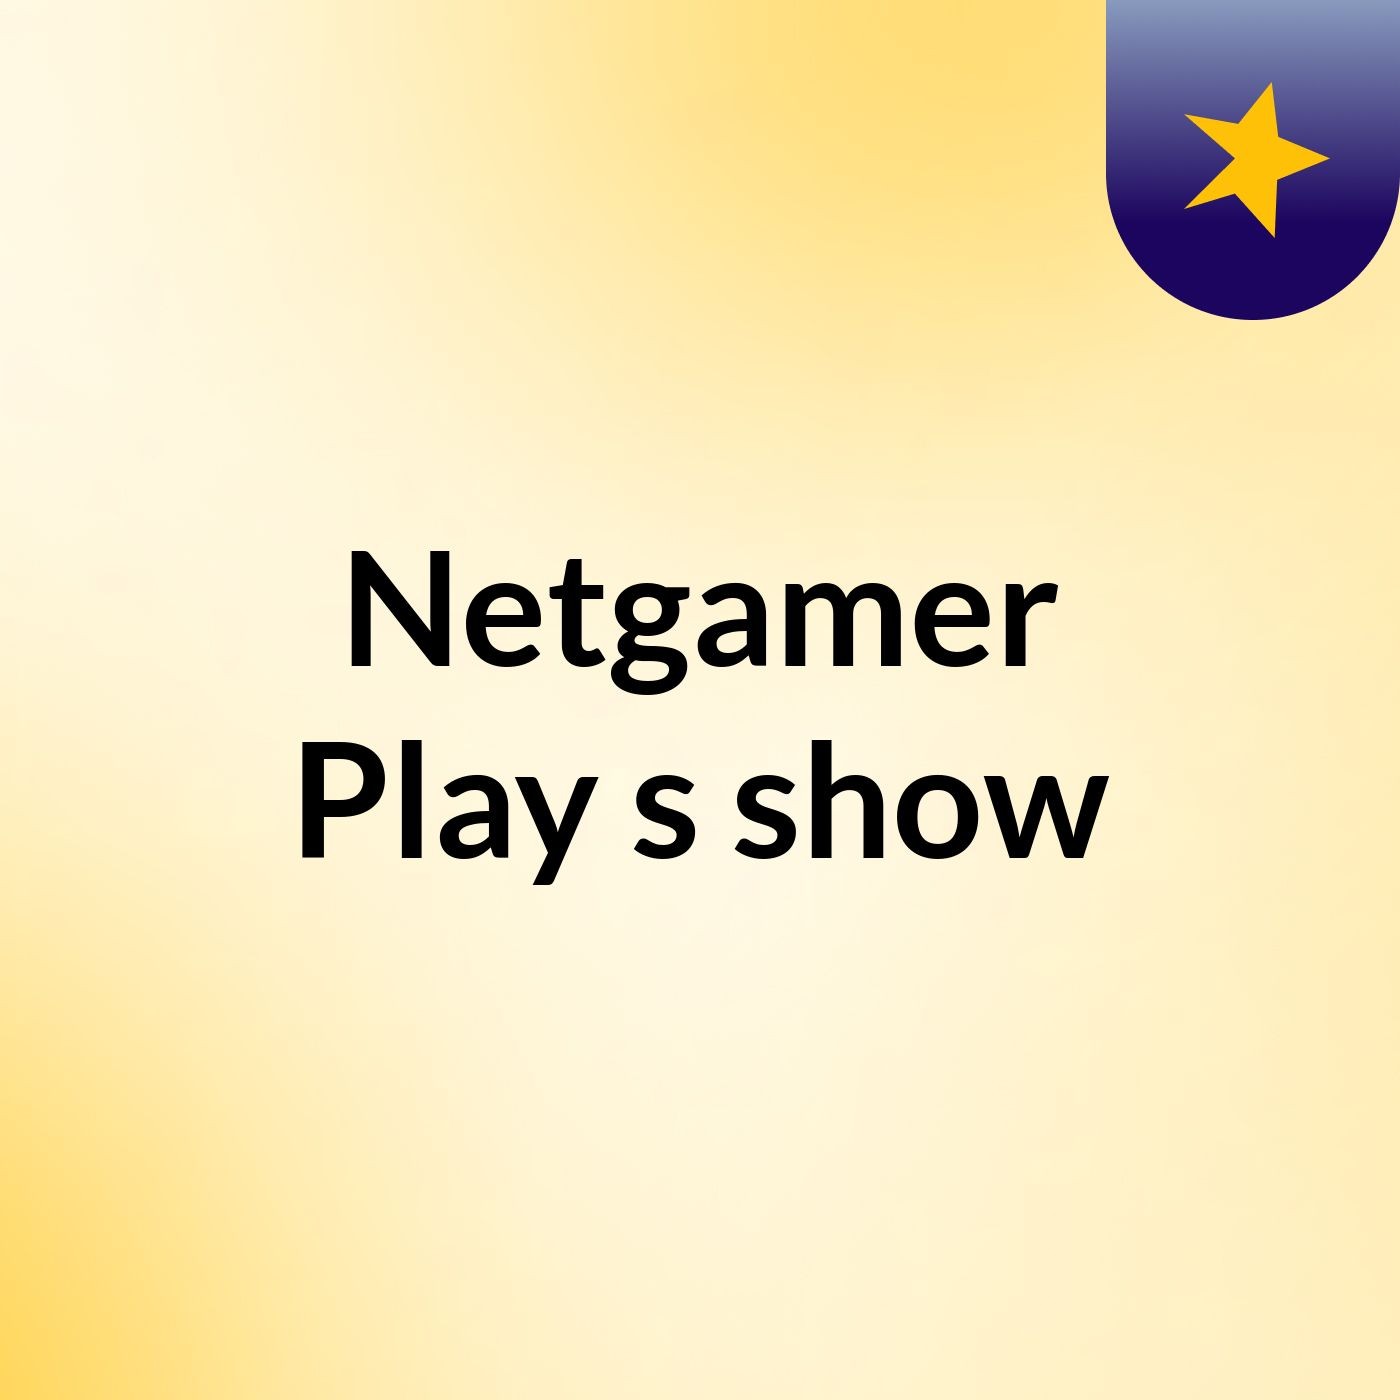 Netgamer Play's show